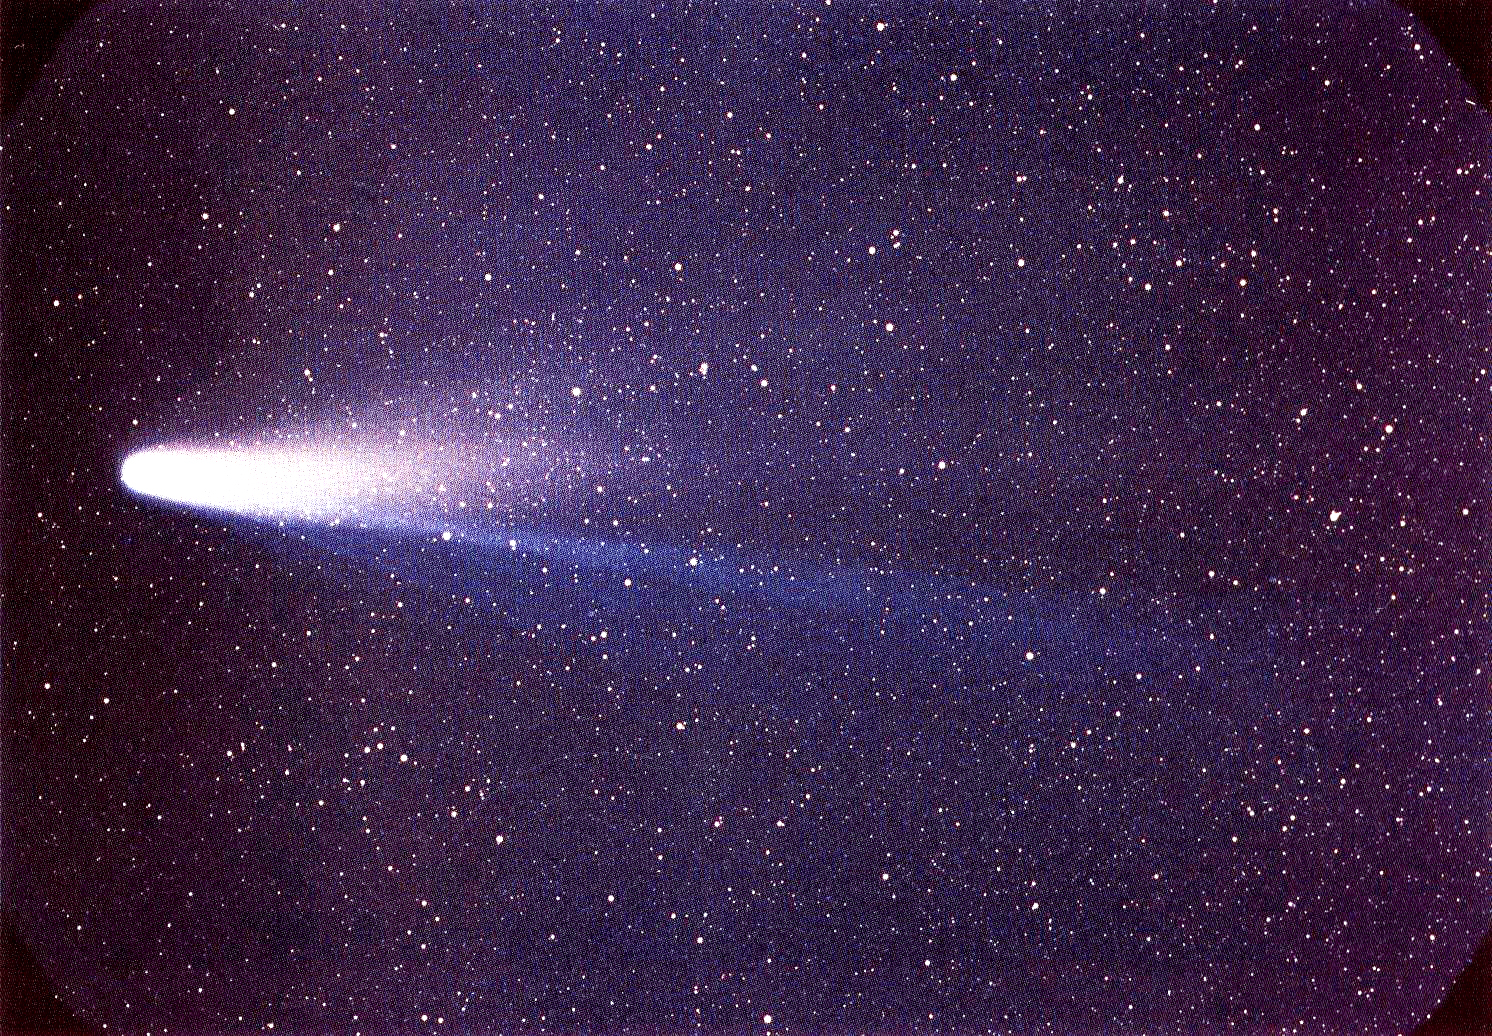 Comet 1P/Halley as taken on March 8, 1986 by W. Liller, Easter Island, part of the International Halley Watch Large Scale Phenomena Network. (Image credit: NASA.W. Liller / Public domain)